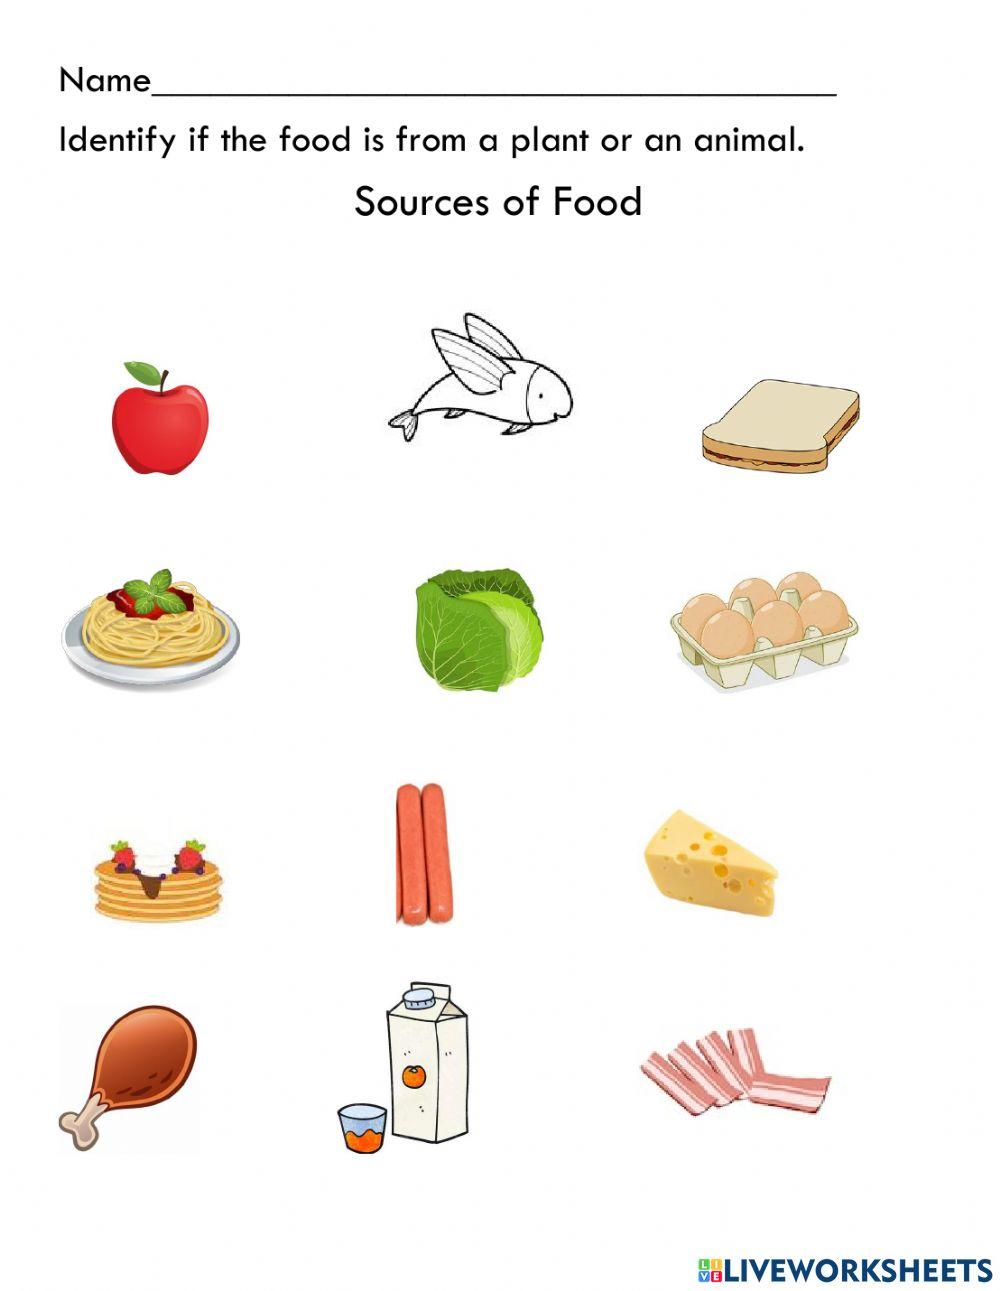 Sources of food